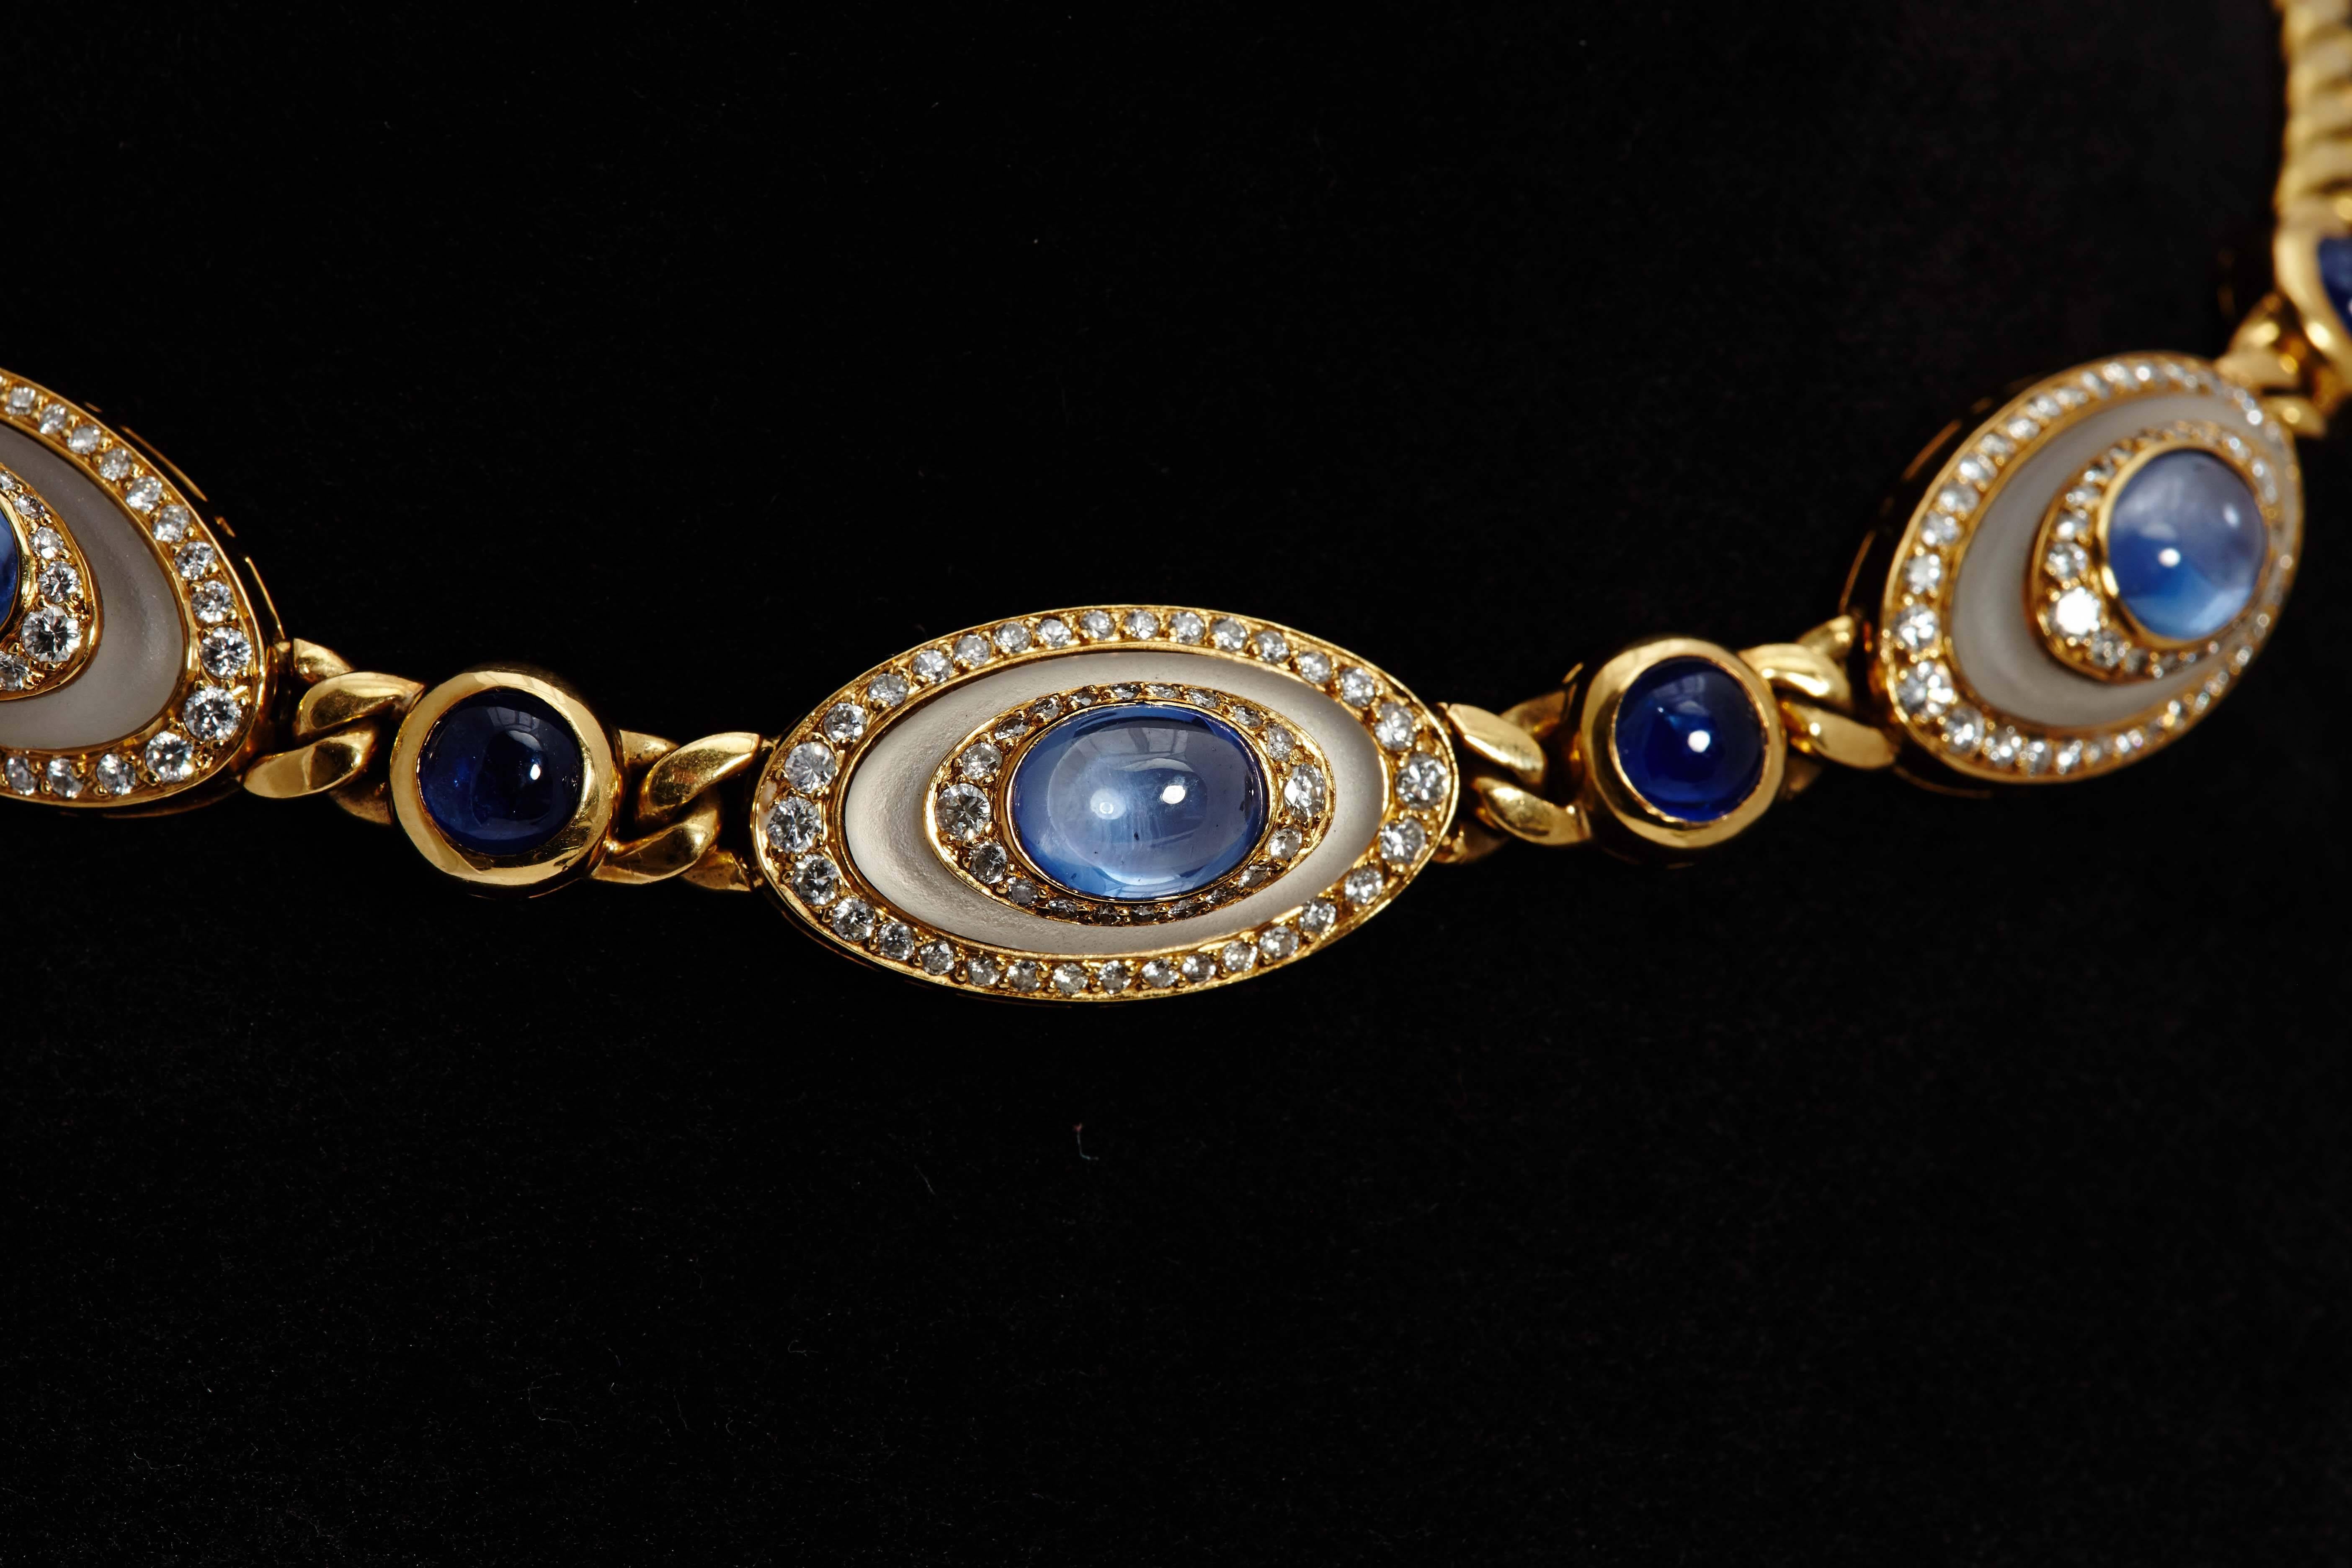 An Unusual 18K Yellow Gold, Sapphire, Diamond & Rock Crystal Necklace by BULGARI . Diamonds: 4 cts. Made in Italy, circa 1975.